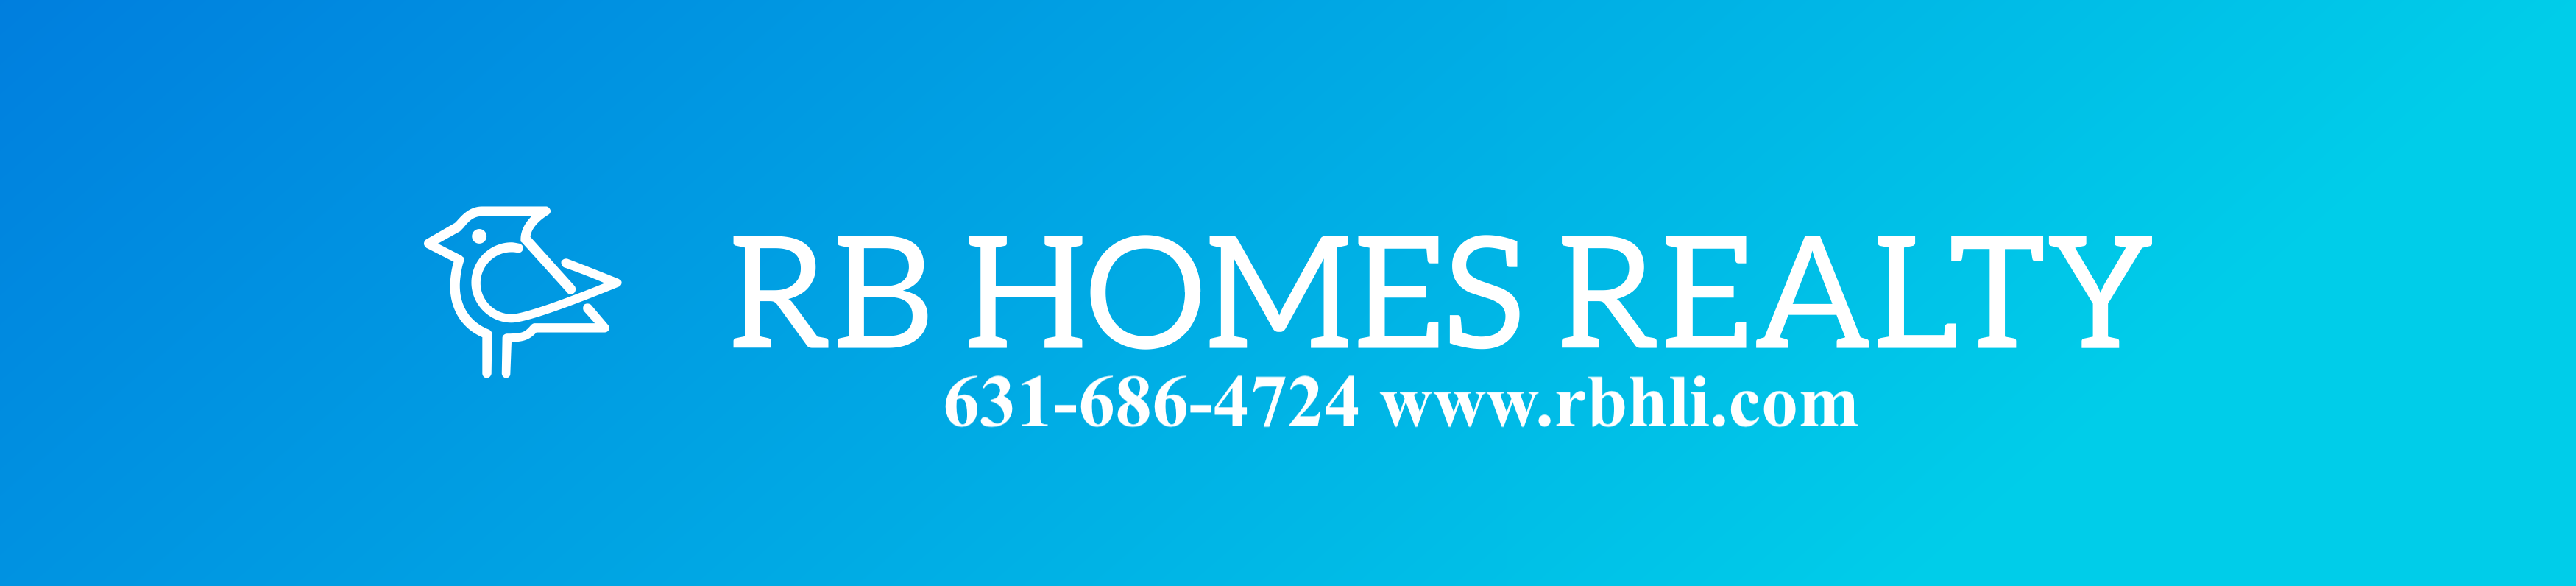 RB Homes Realty